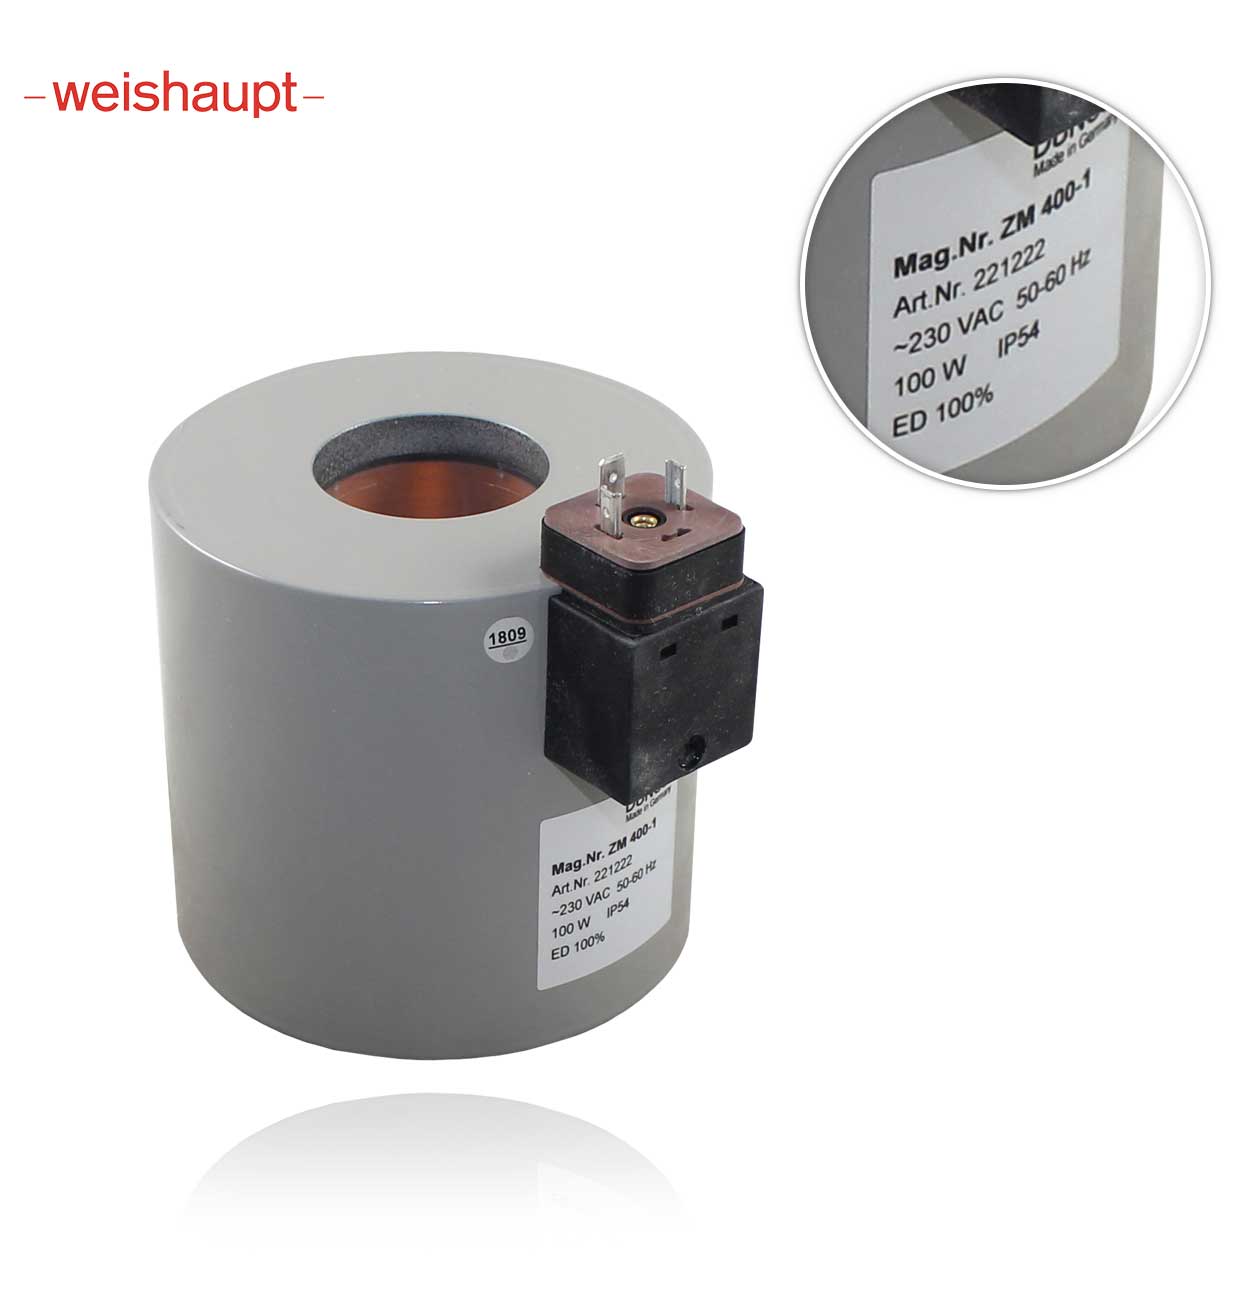 WEISHAUPT 605932 MDK80 230V 50-60Hz ZM 400-1 COIL WITH CONNECTOR